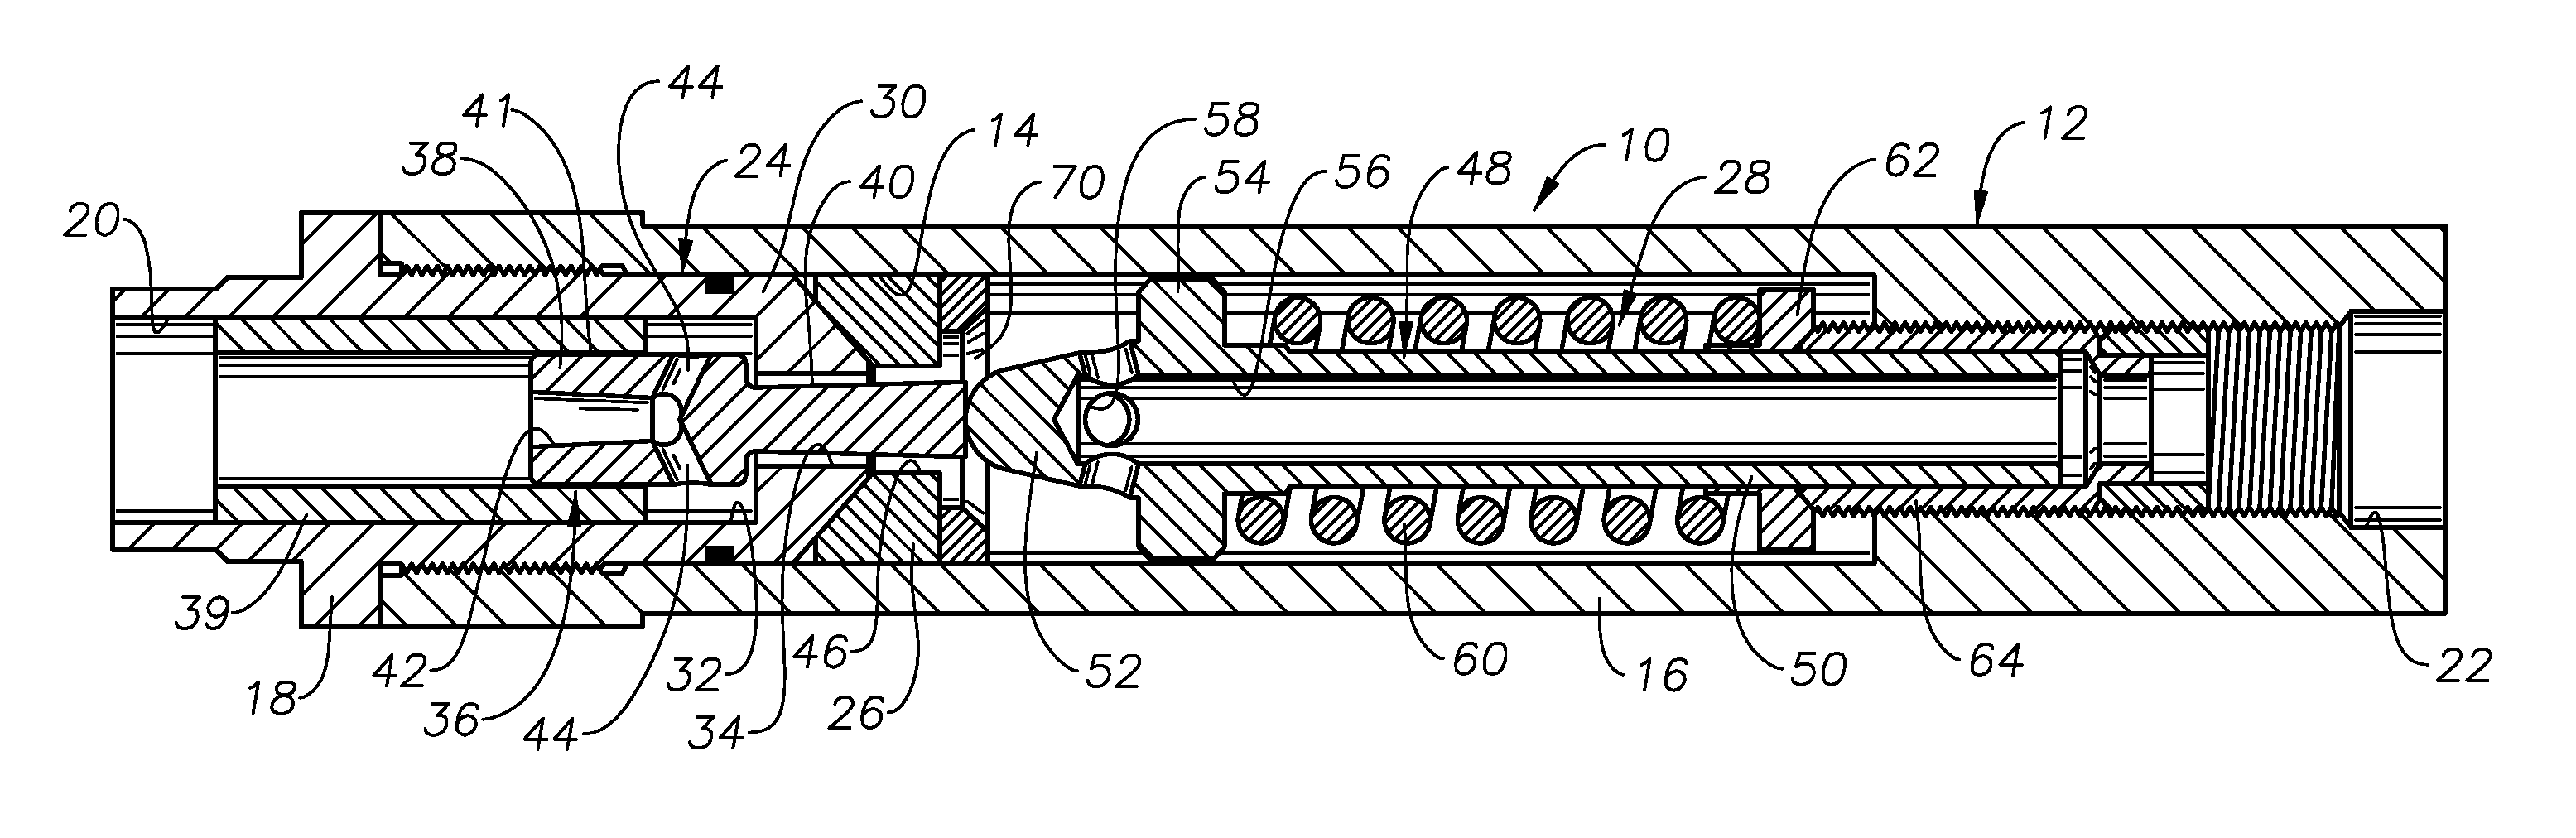 Valve for Use in Chemical Injectors and the Like